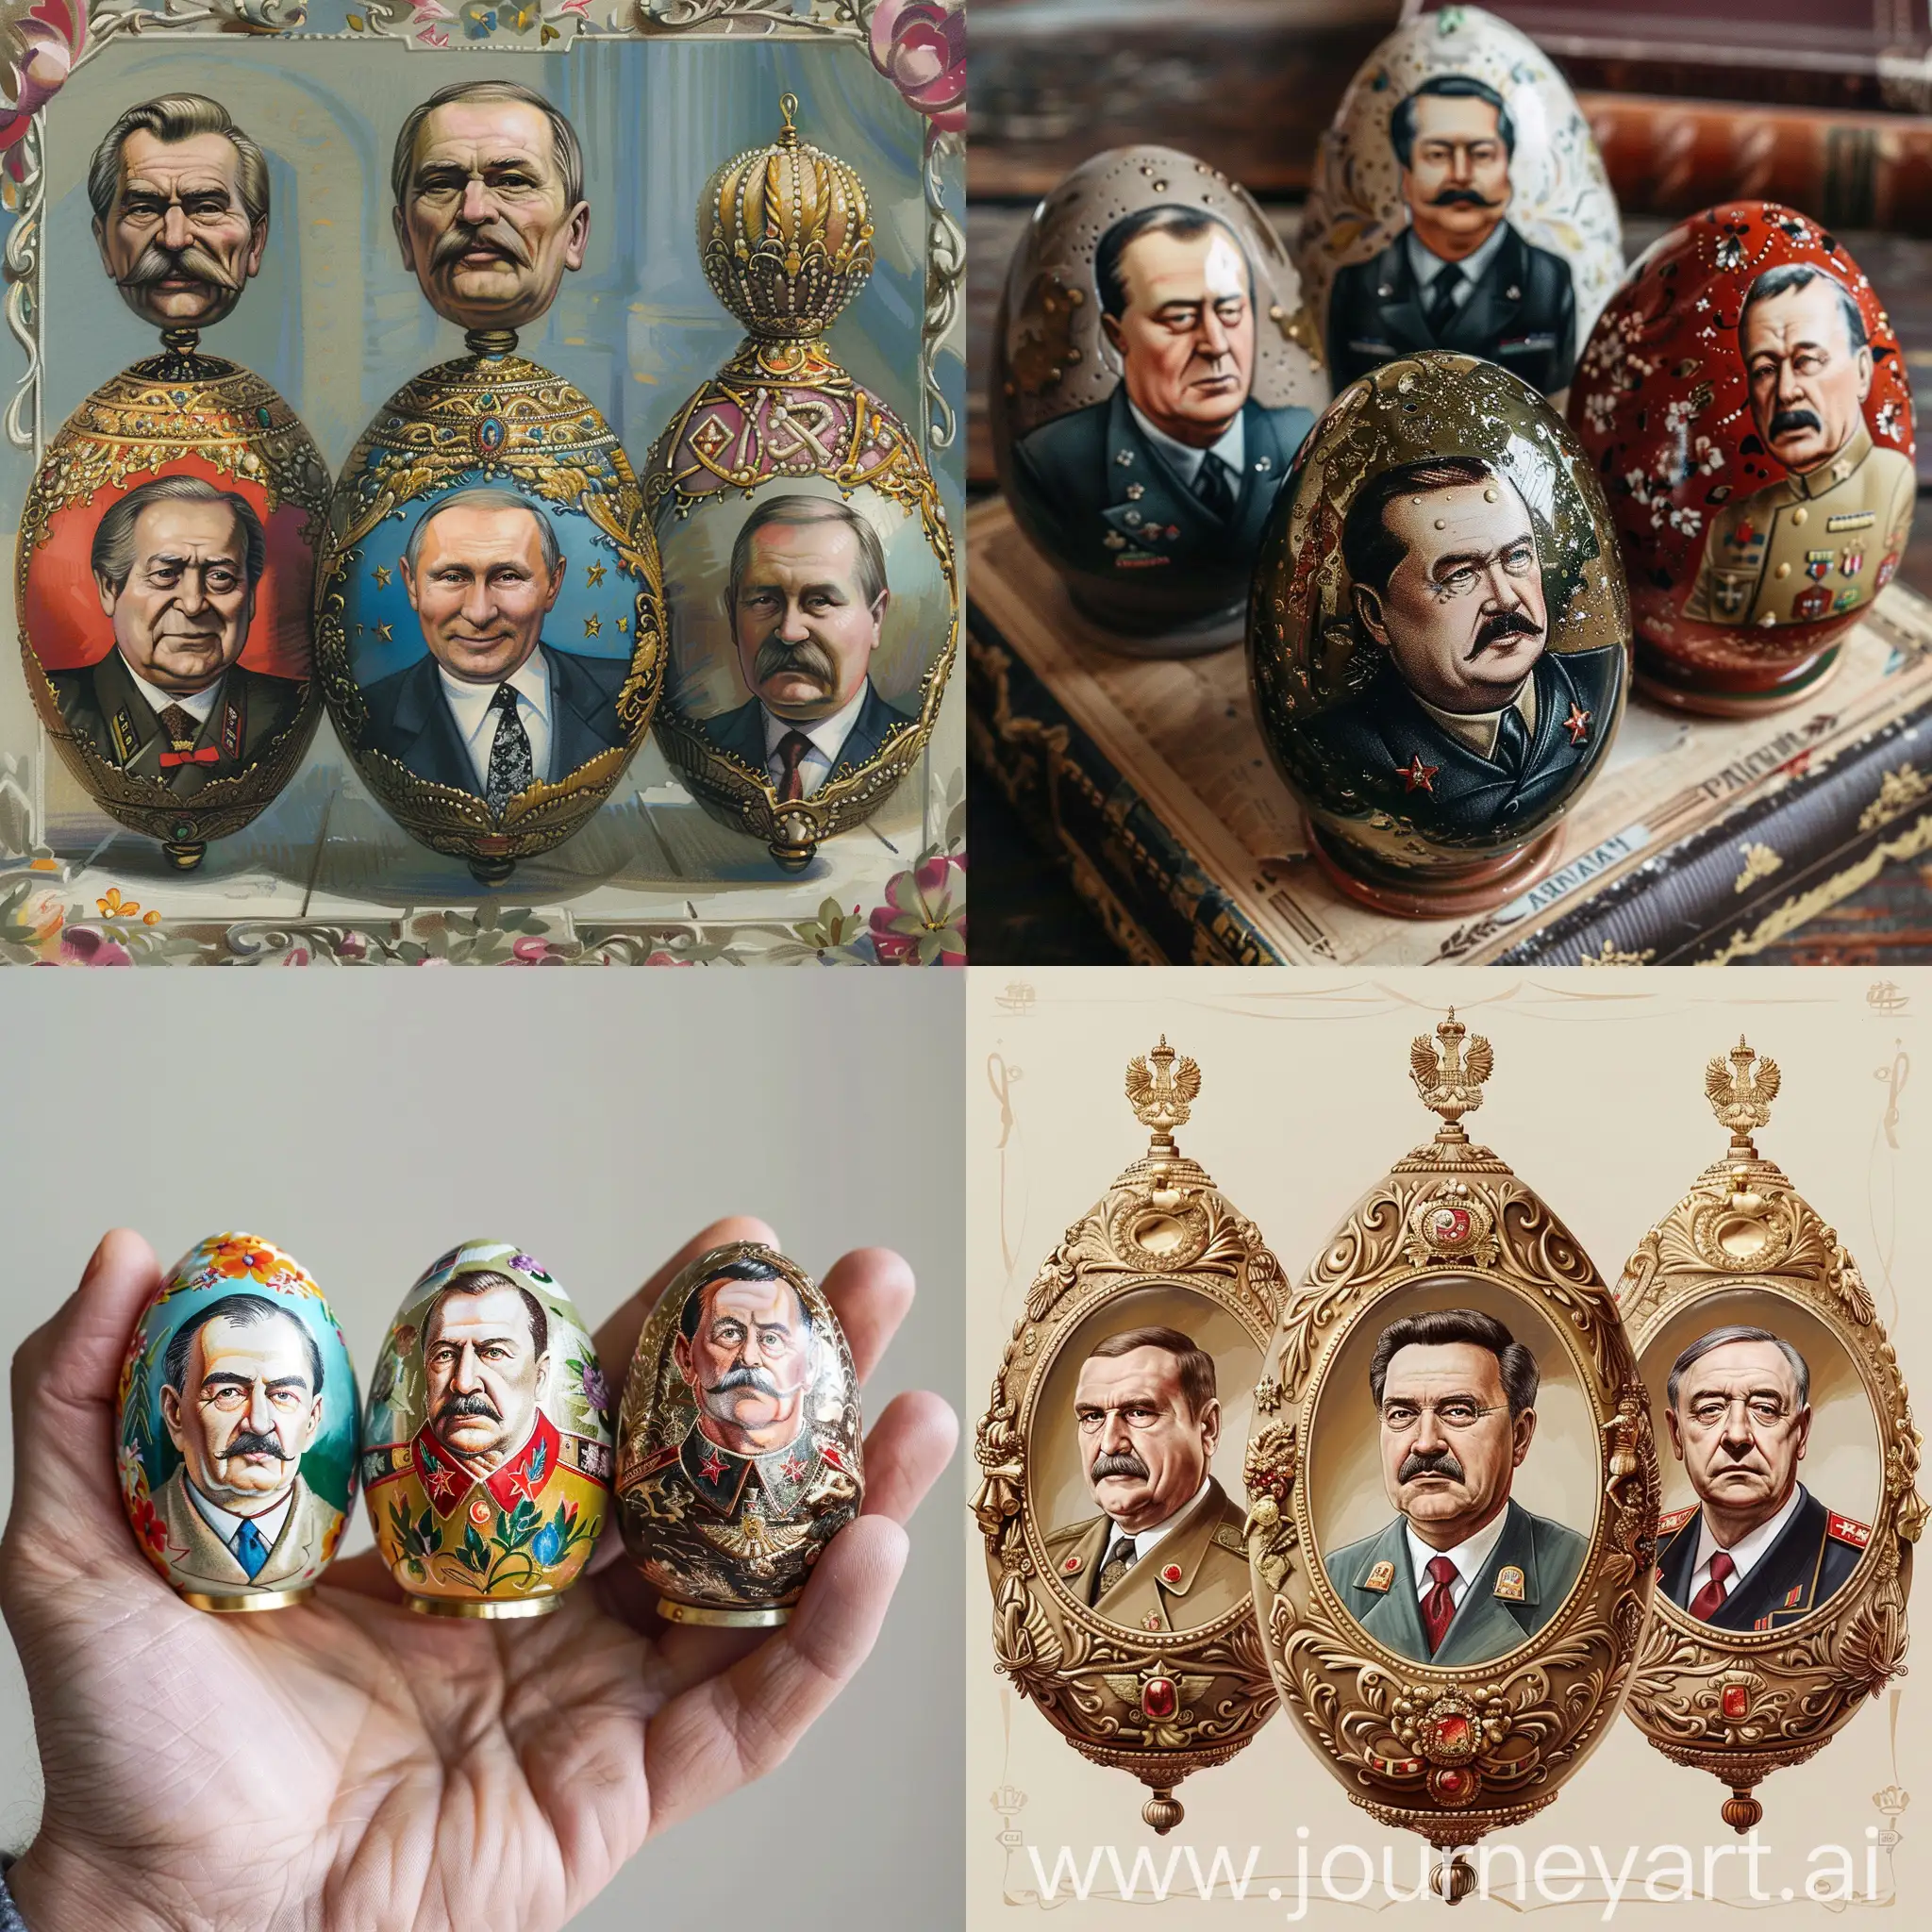 Faberg-Eggs-with-Historical-Figures-Ceausescu-Stalin-Putin-and-More